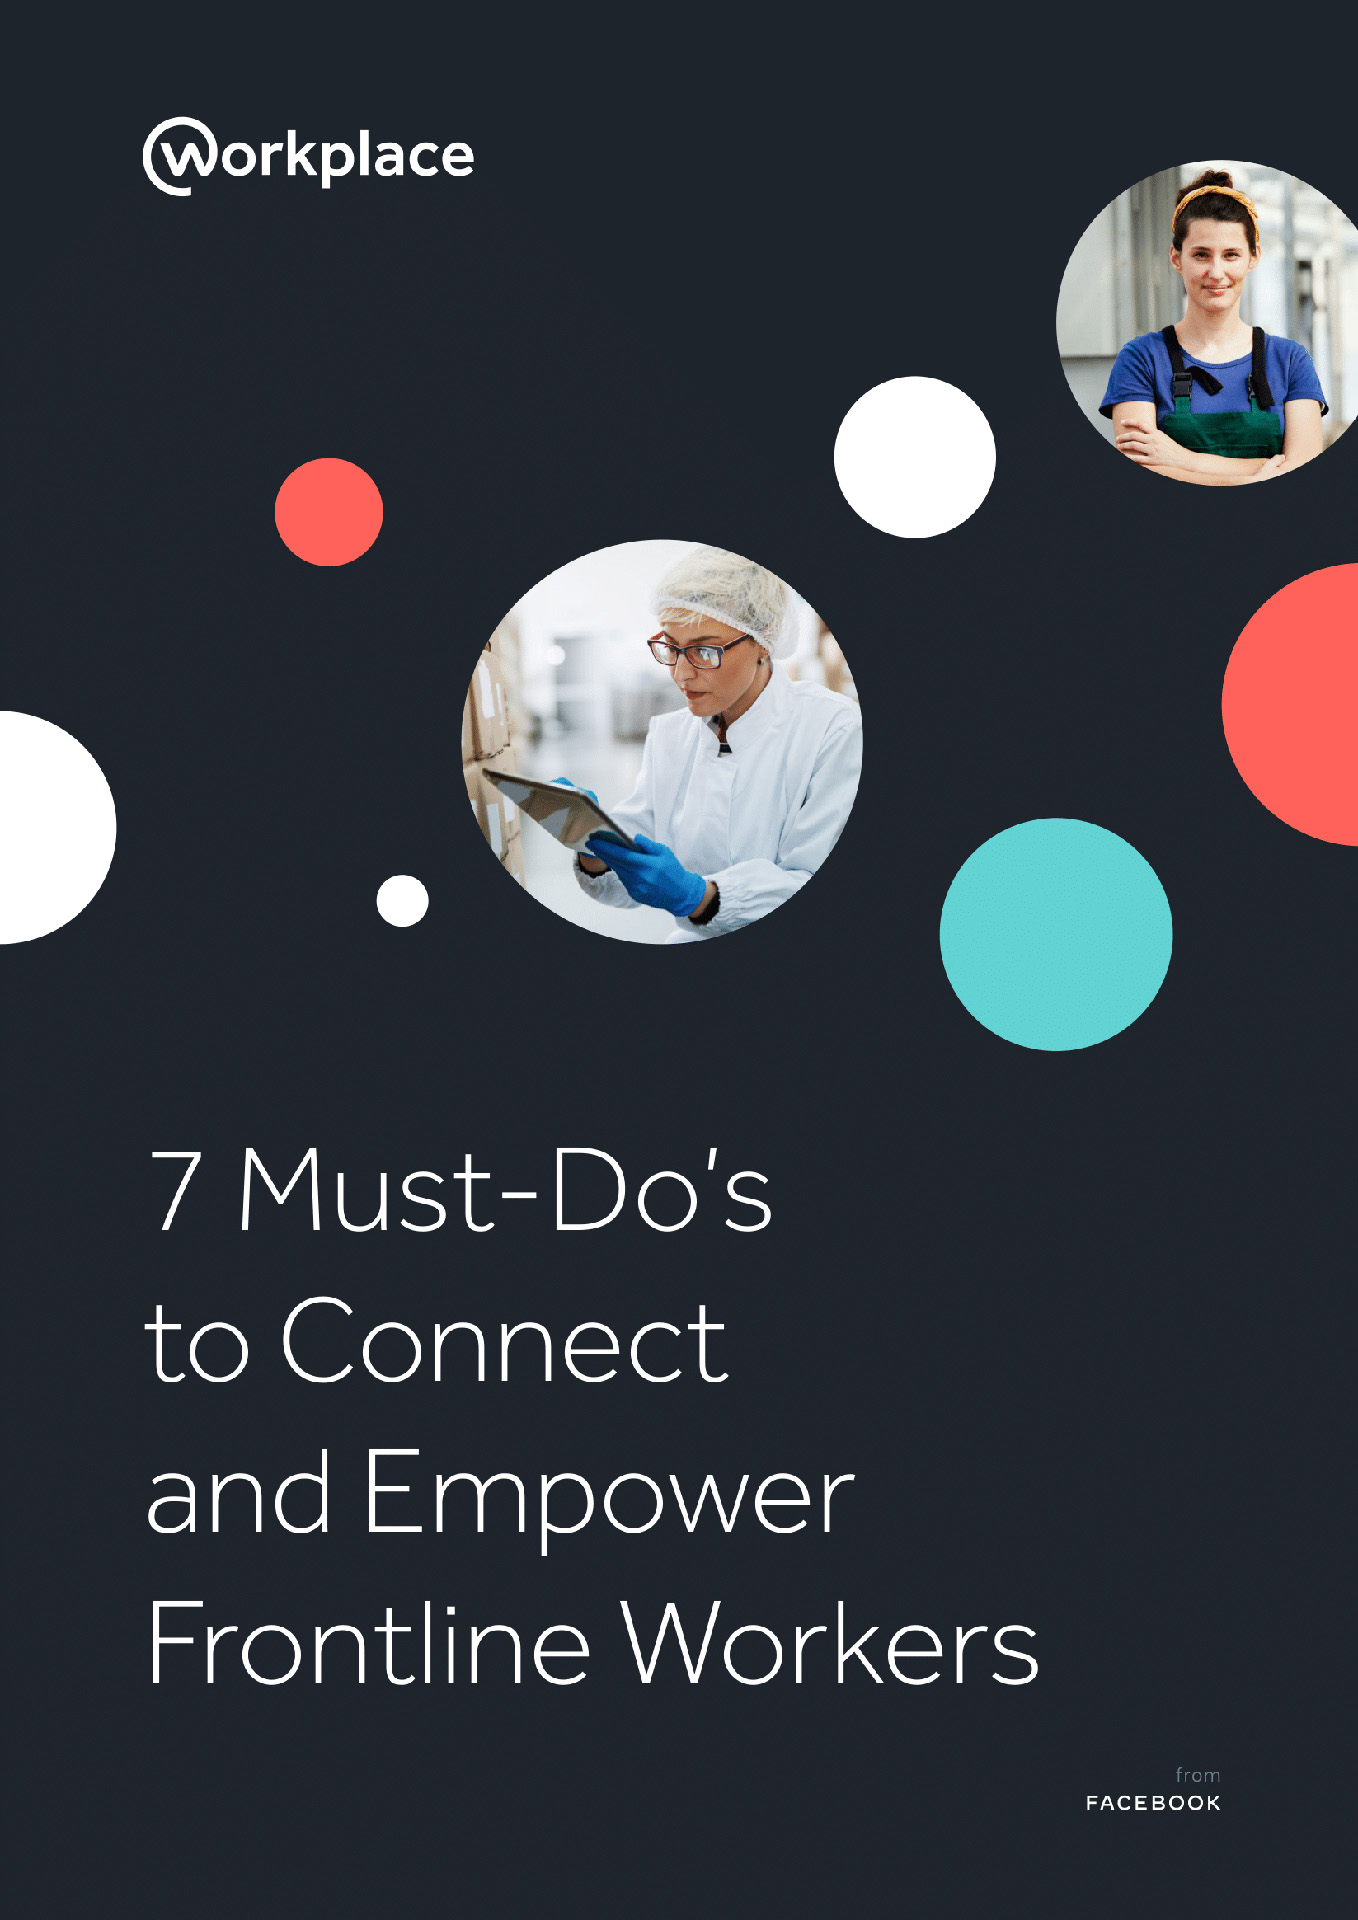 7 Must-Do’s to Connect and Empower Frontline Workers Guide